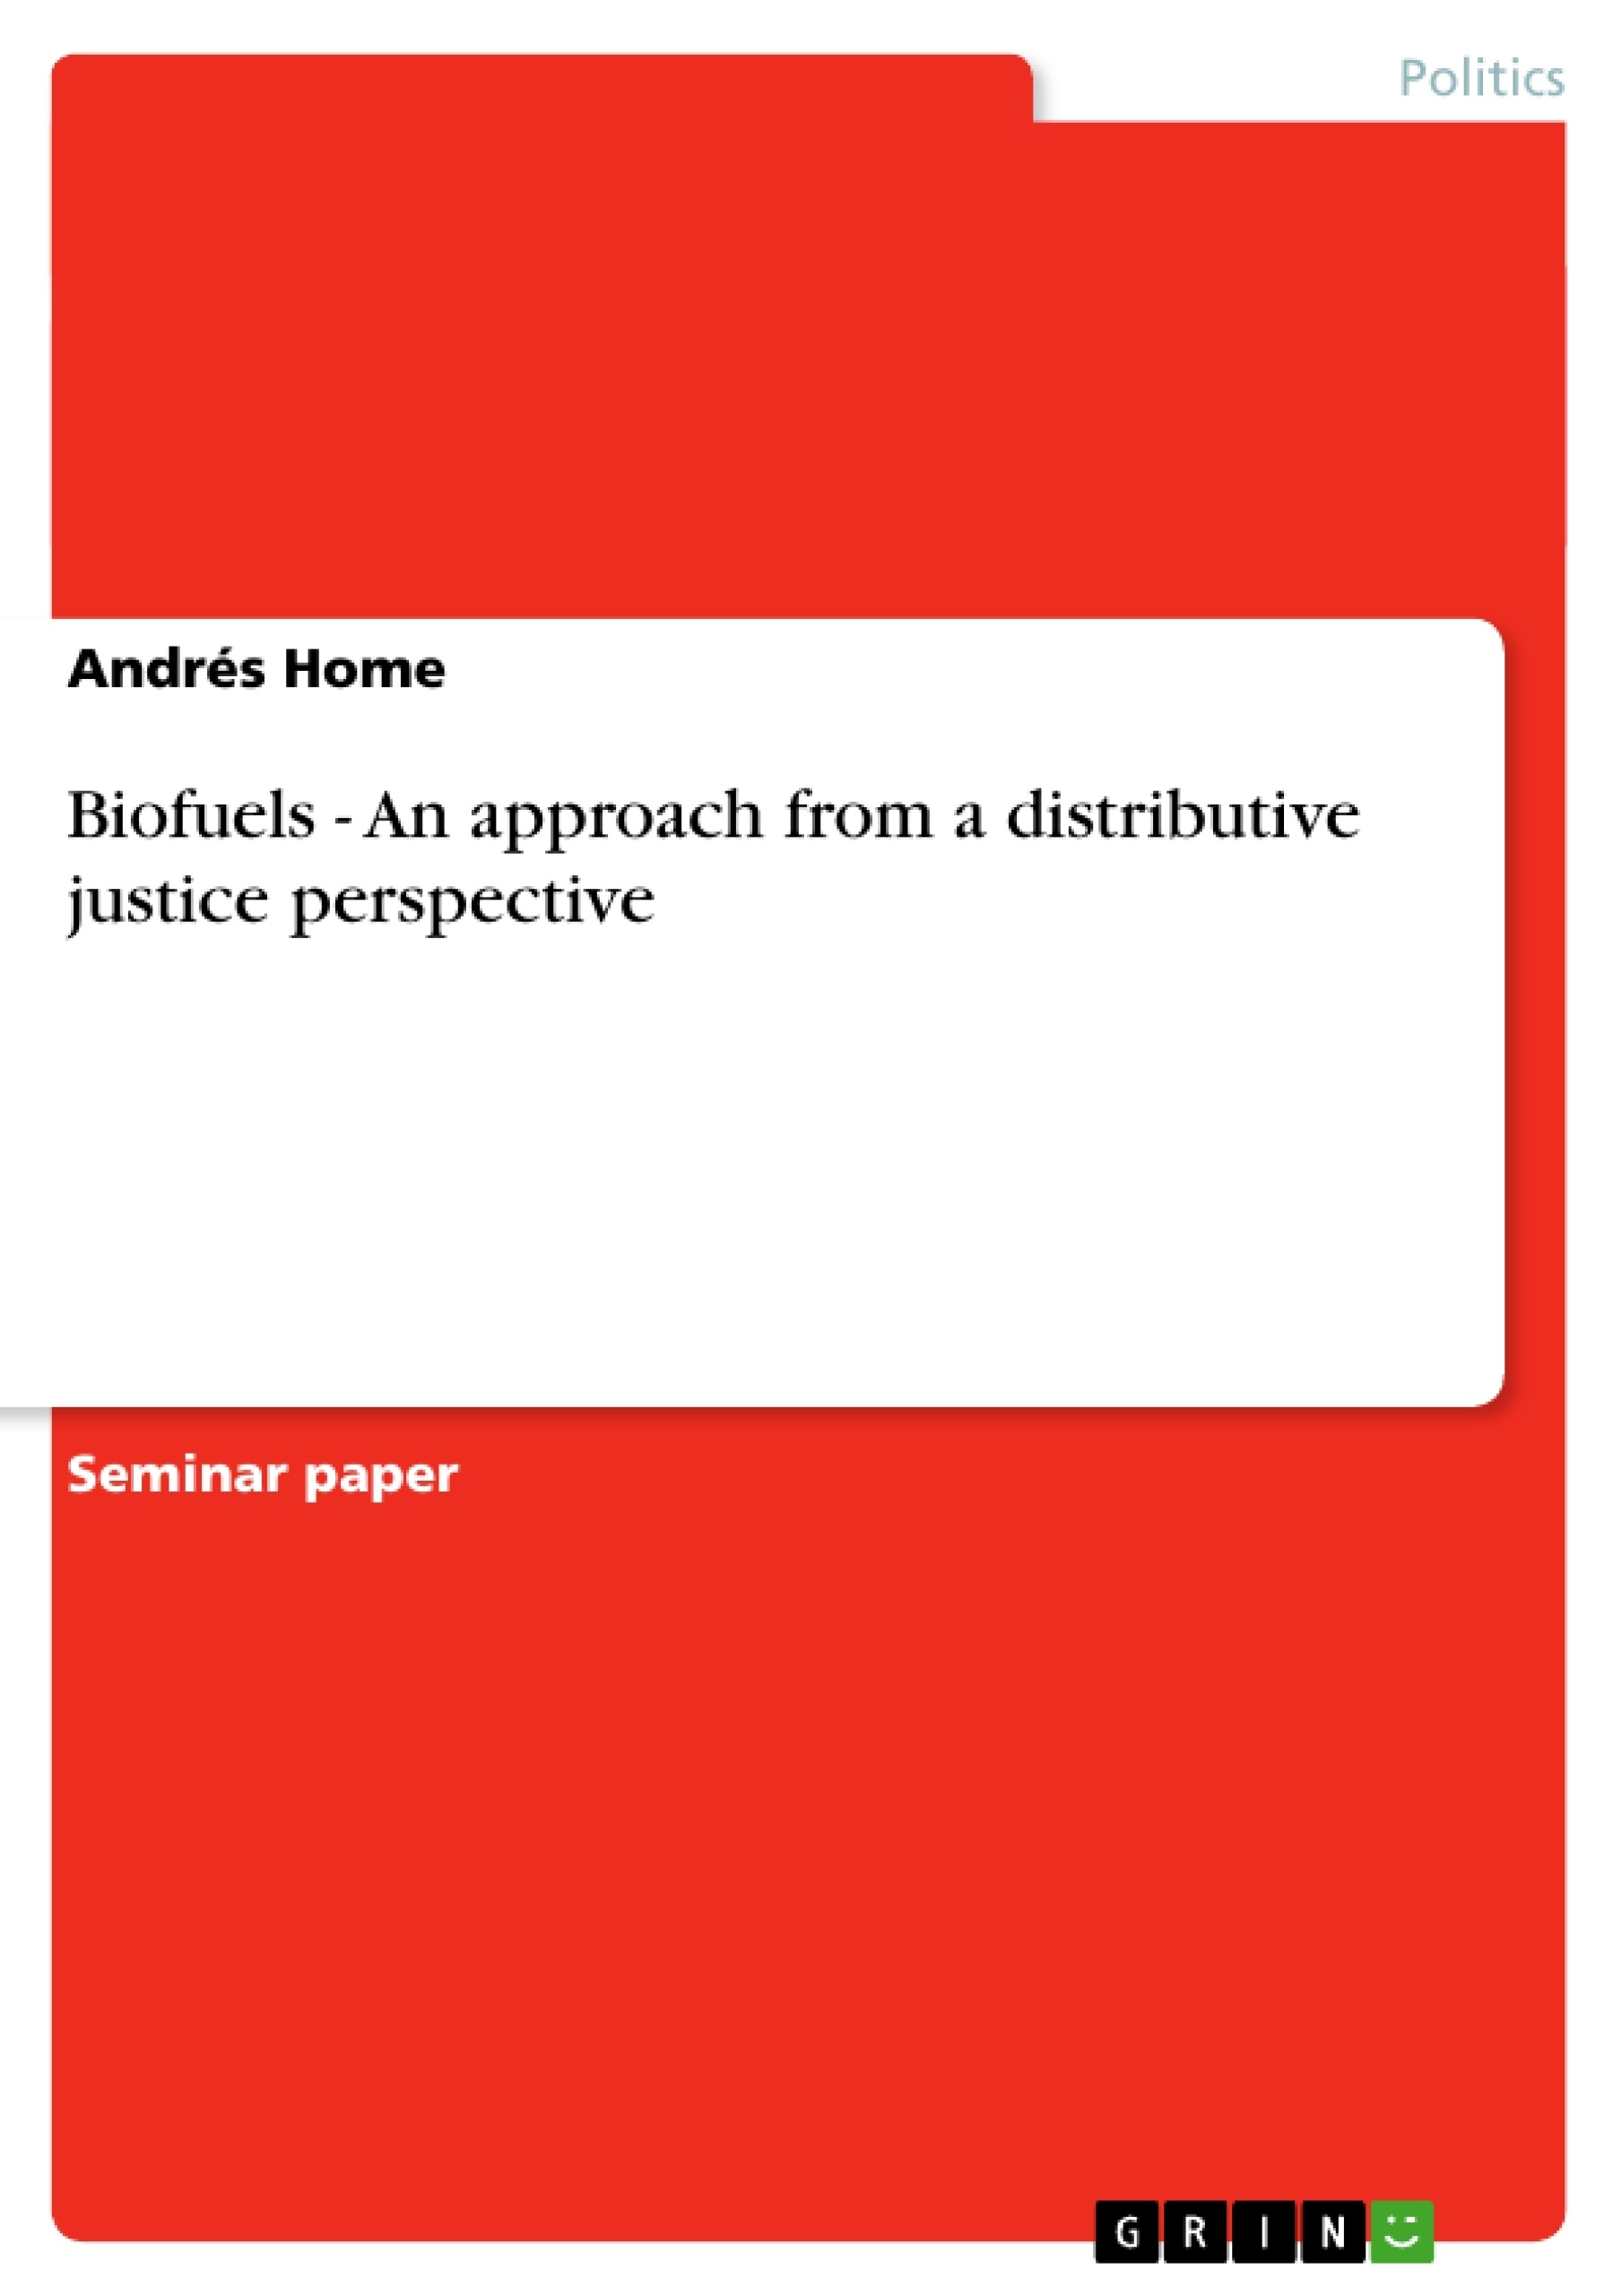 Title: Biofuels - An approach from a distributive justice perspective